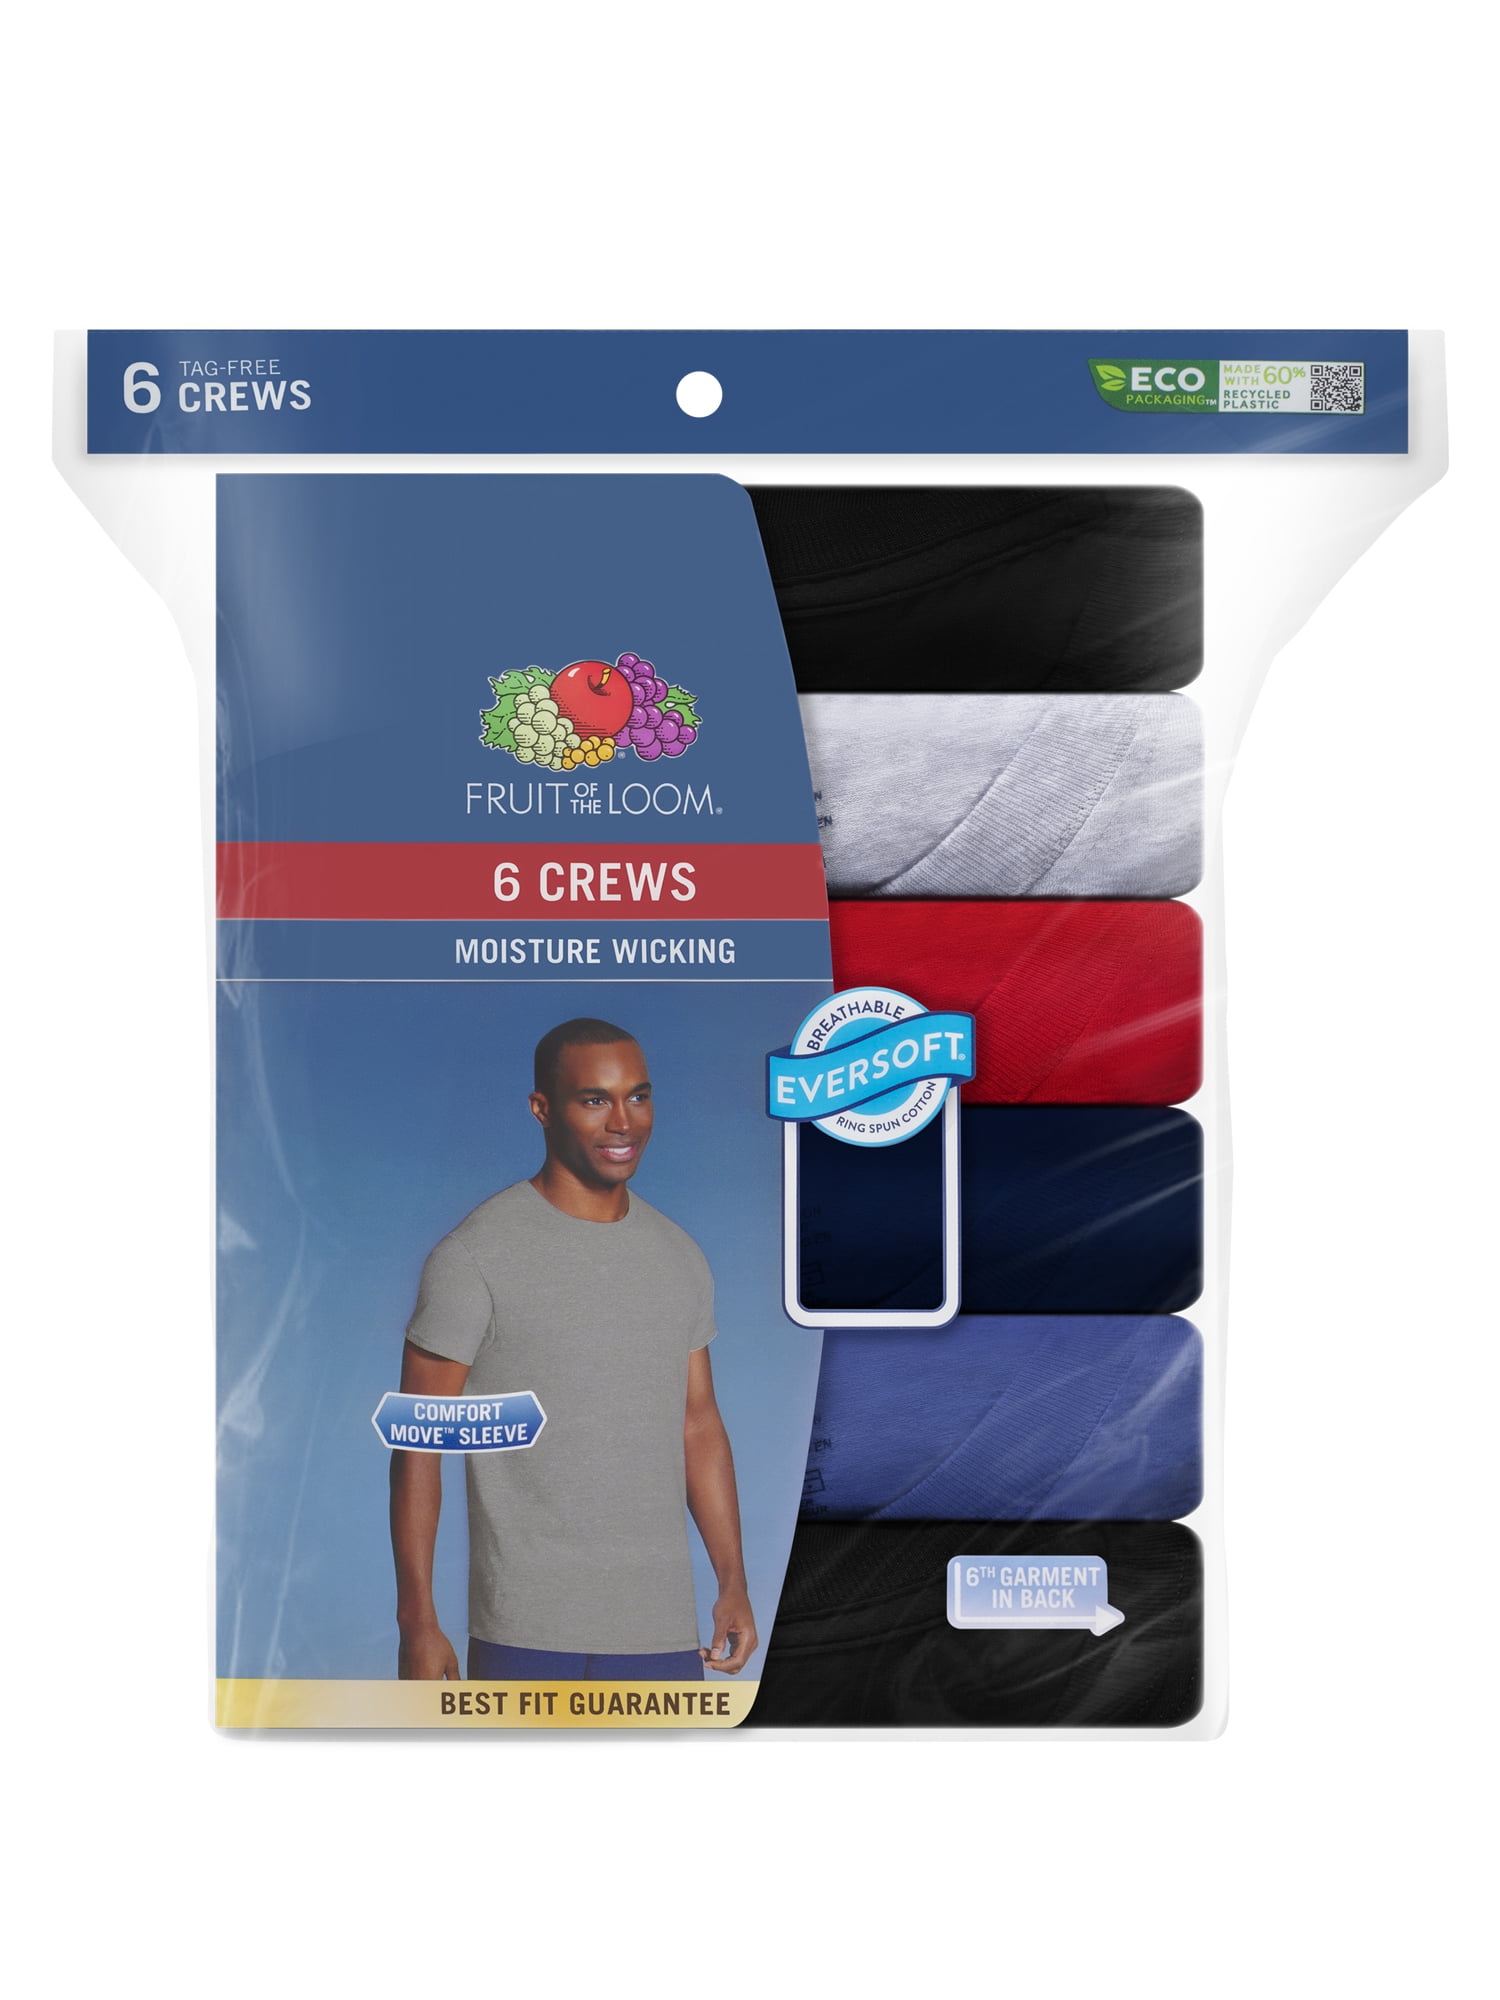 Fruit of the Loom Men's Assorted Color Crew Undershirts, Pack, Sizes S-3XL - Walmart.com